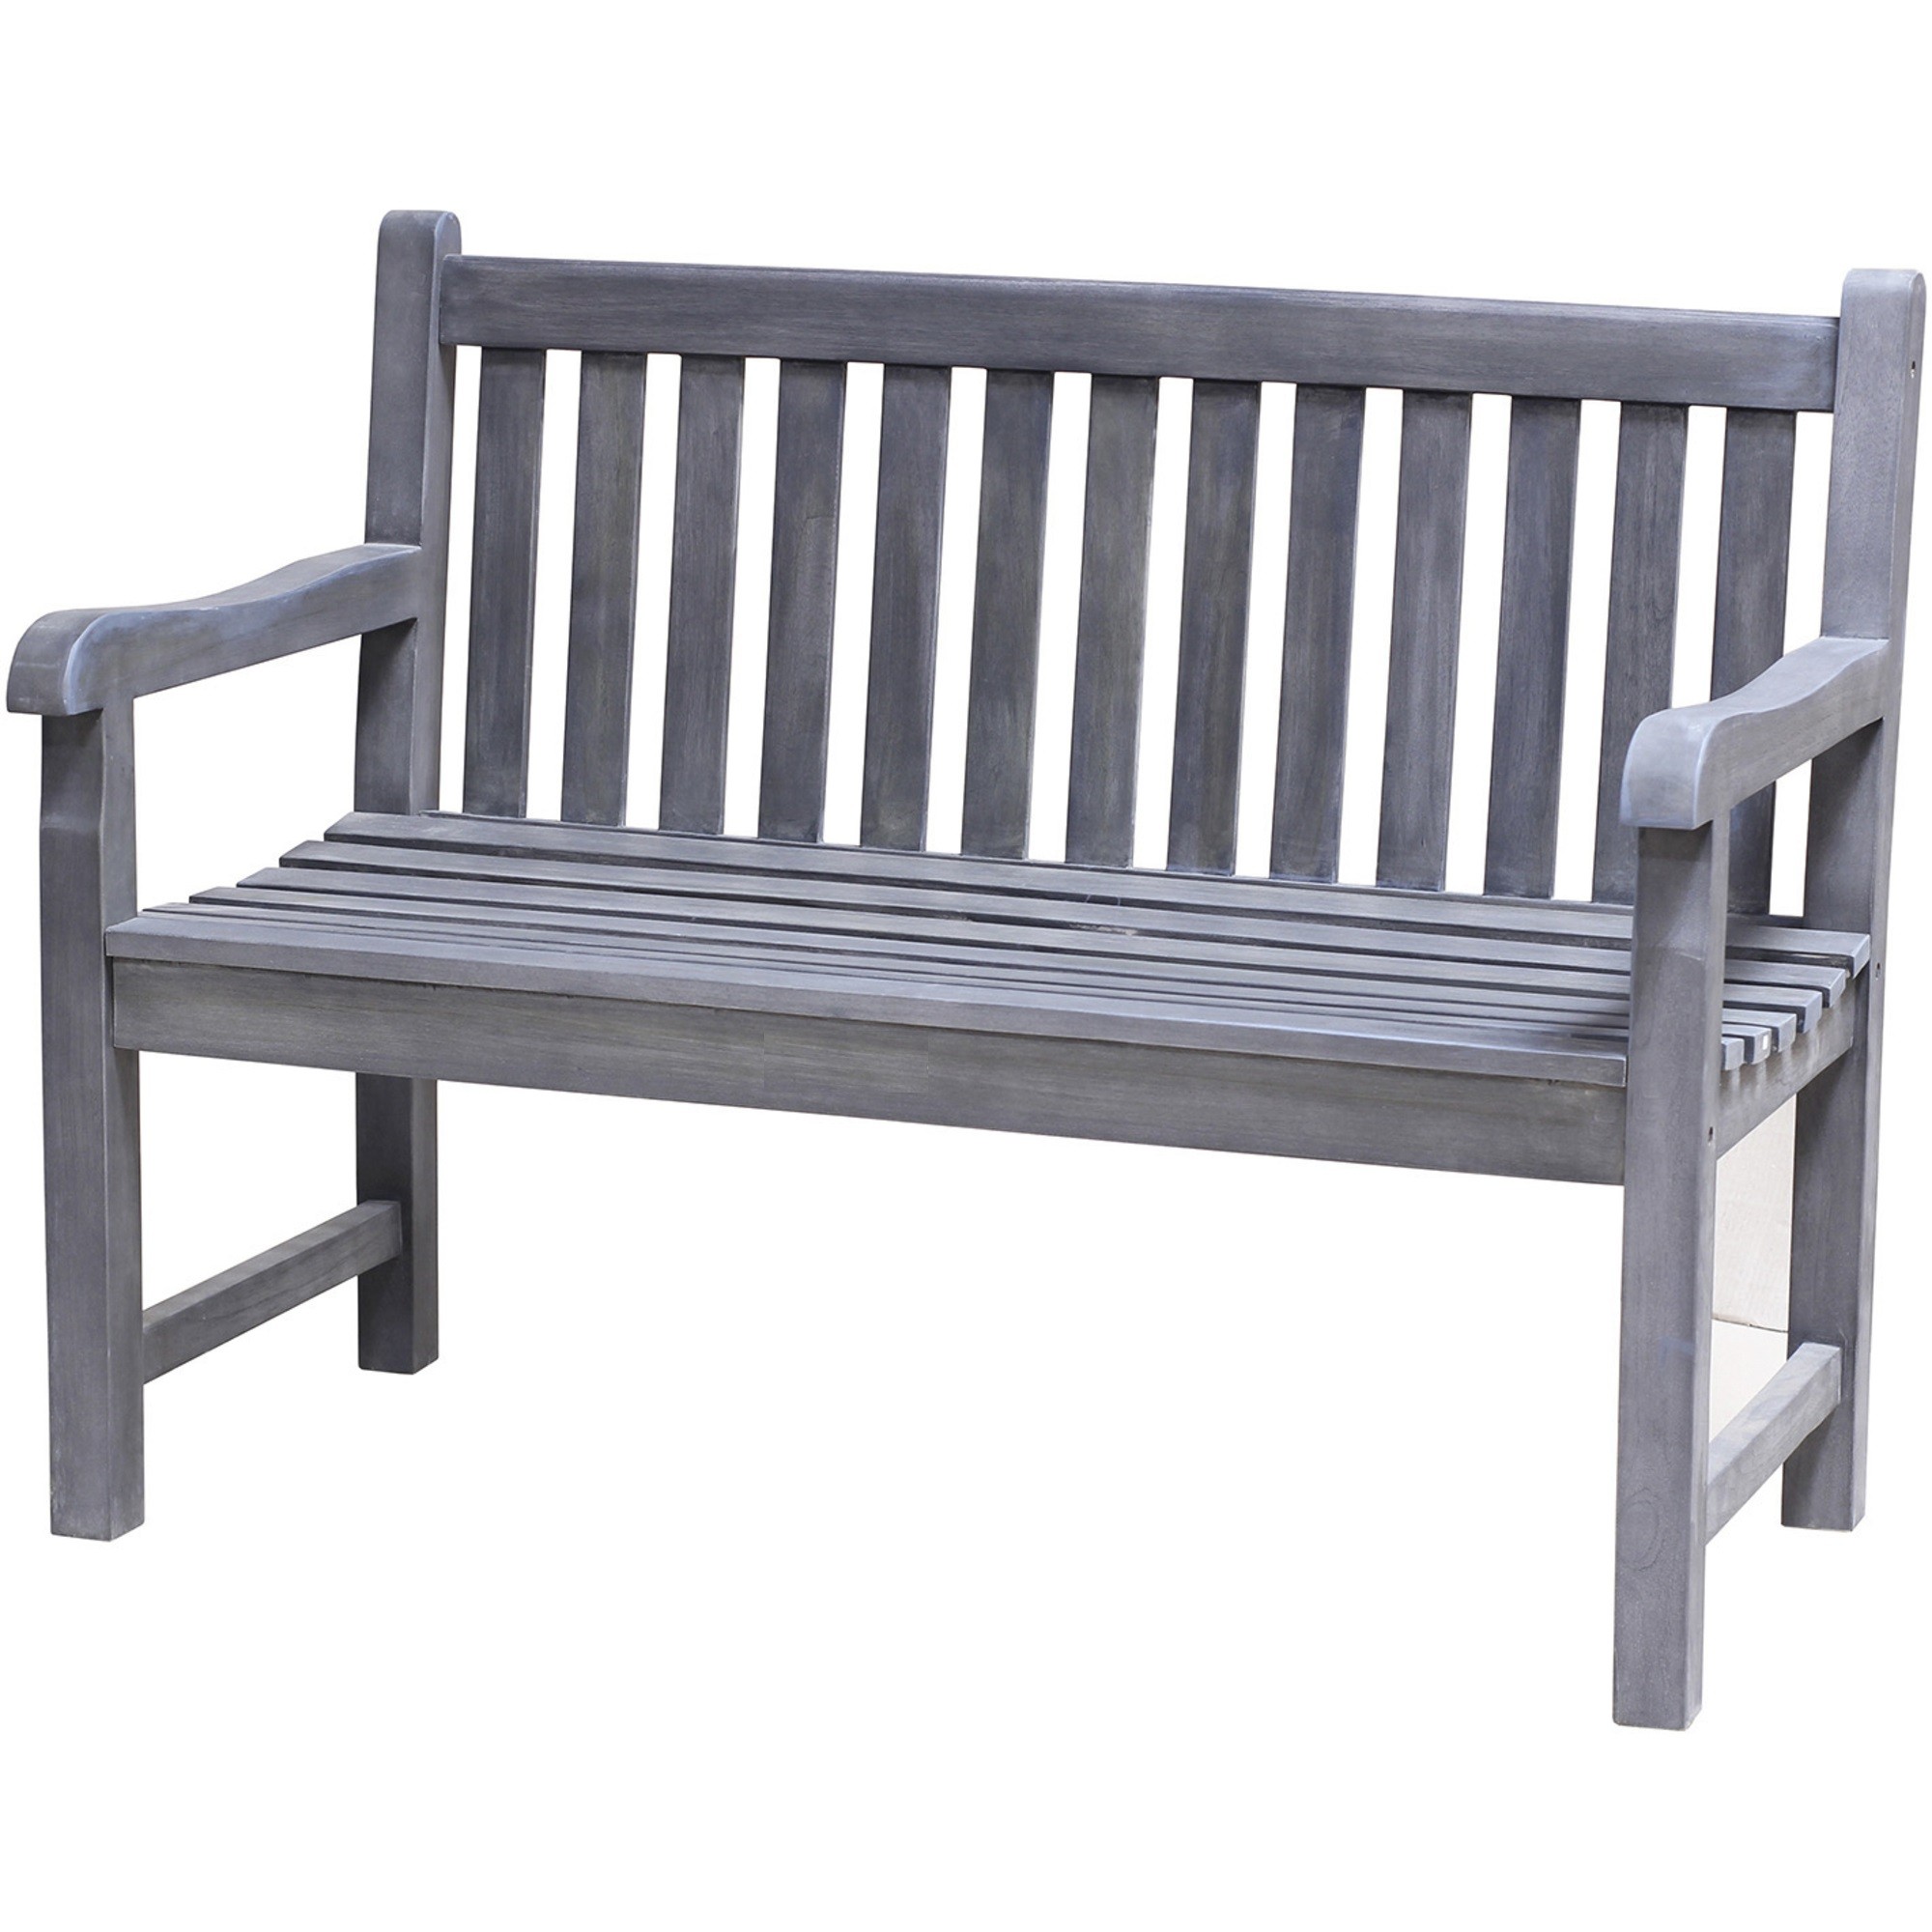 Compact Teak Outdoor Bench with Staright Design in Coquina Finish